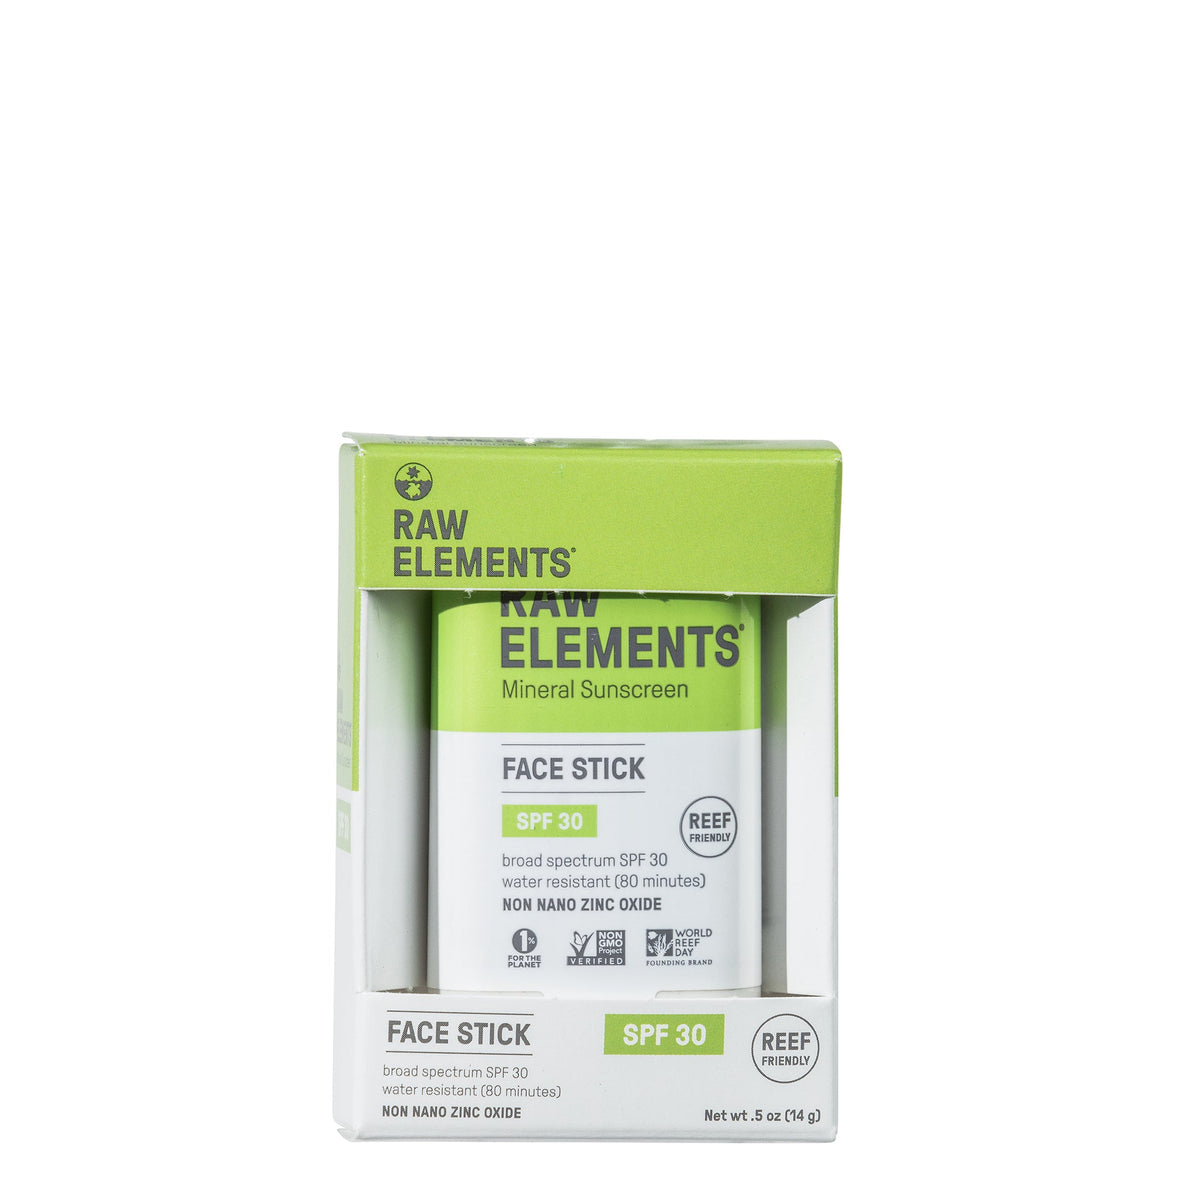 RAW ELEMENTS ECO FACE STICK SPF 30+